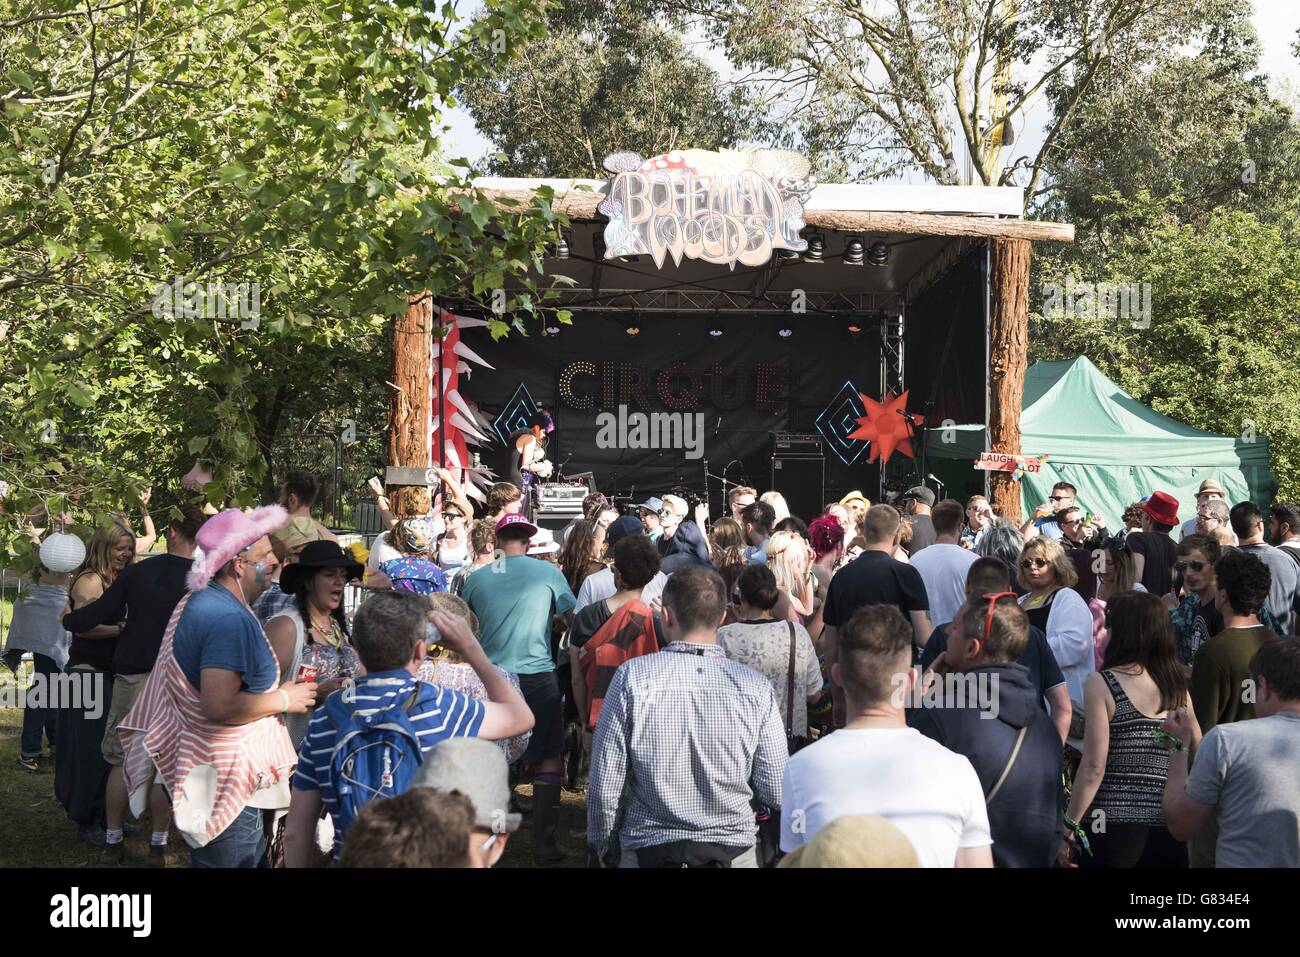 General view of the Bohemian woods stage on day 3 of the Isle of Wight Festival 2015, Seaclose Park, Isle of Wight Stock Photo